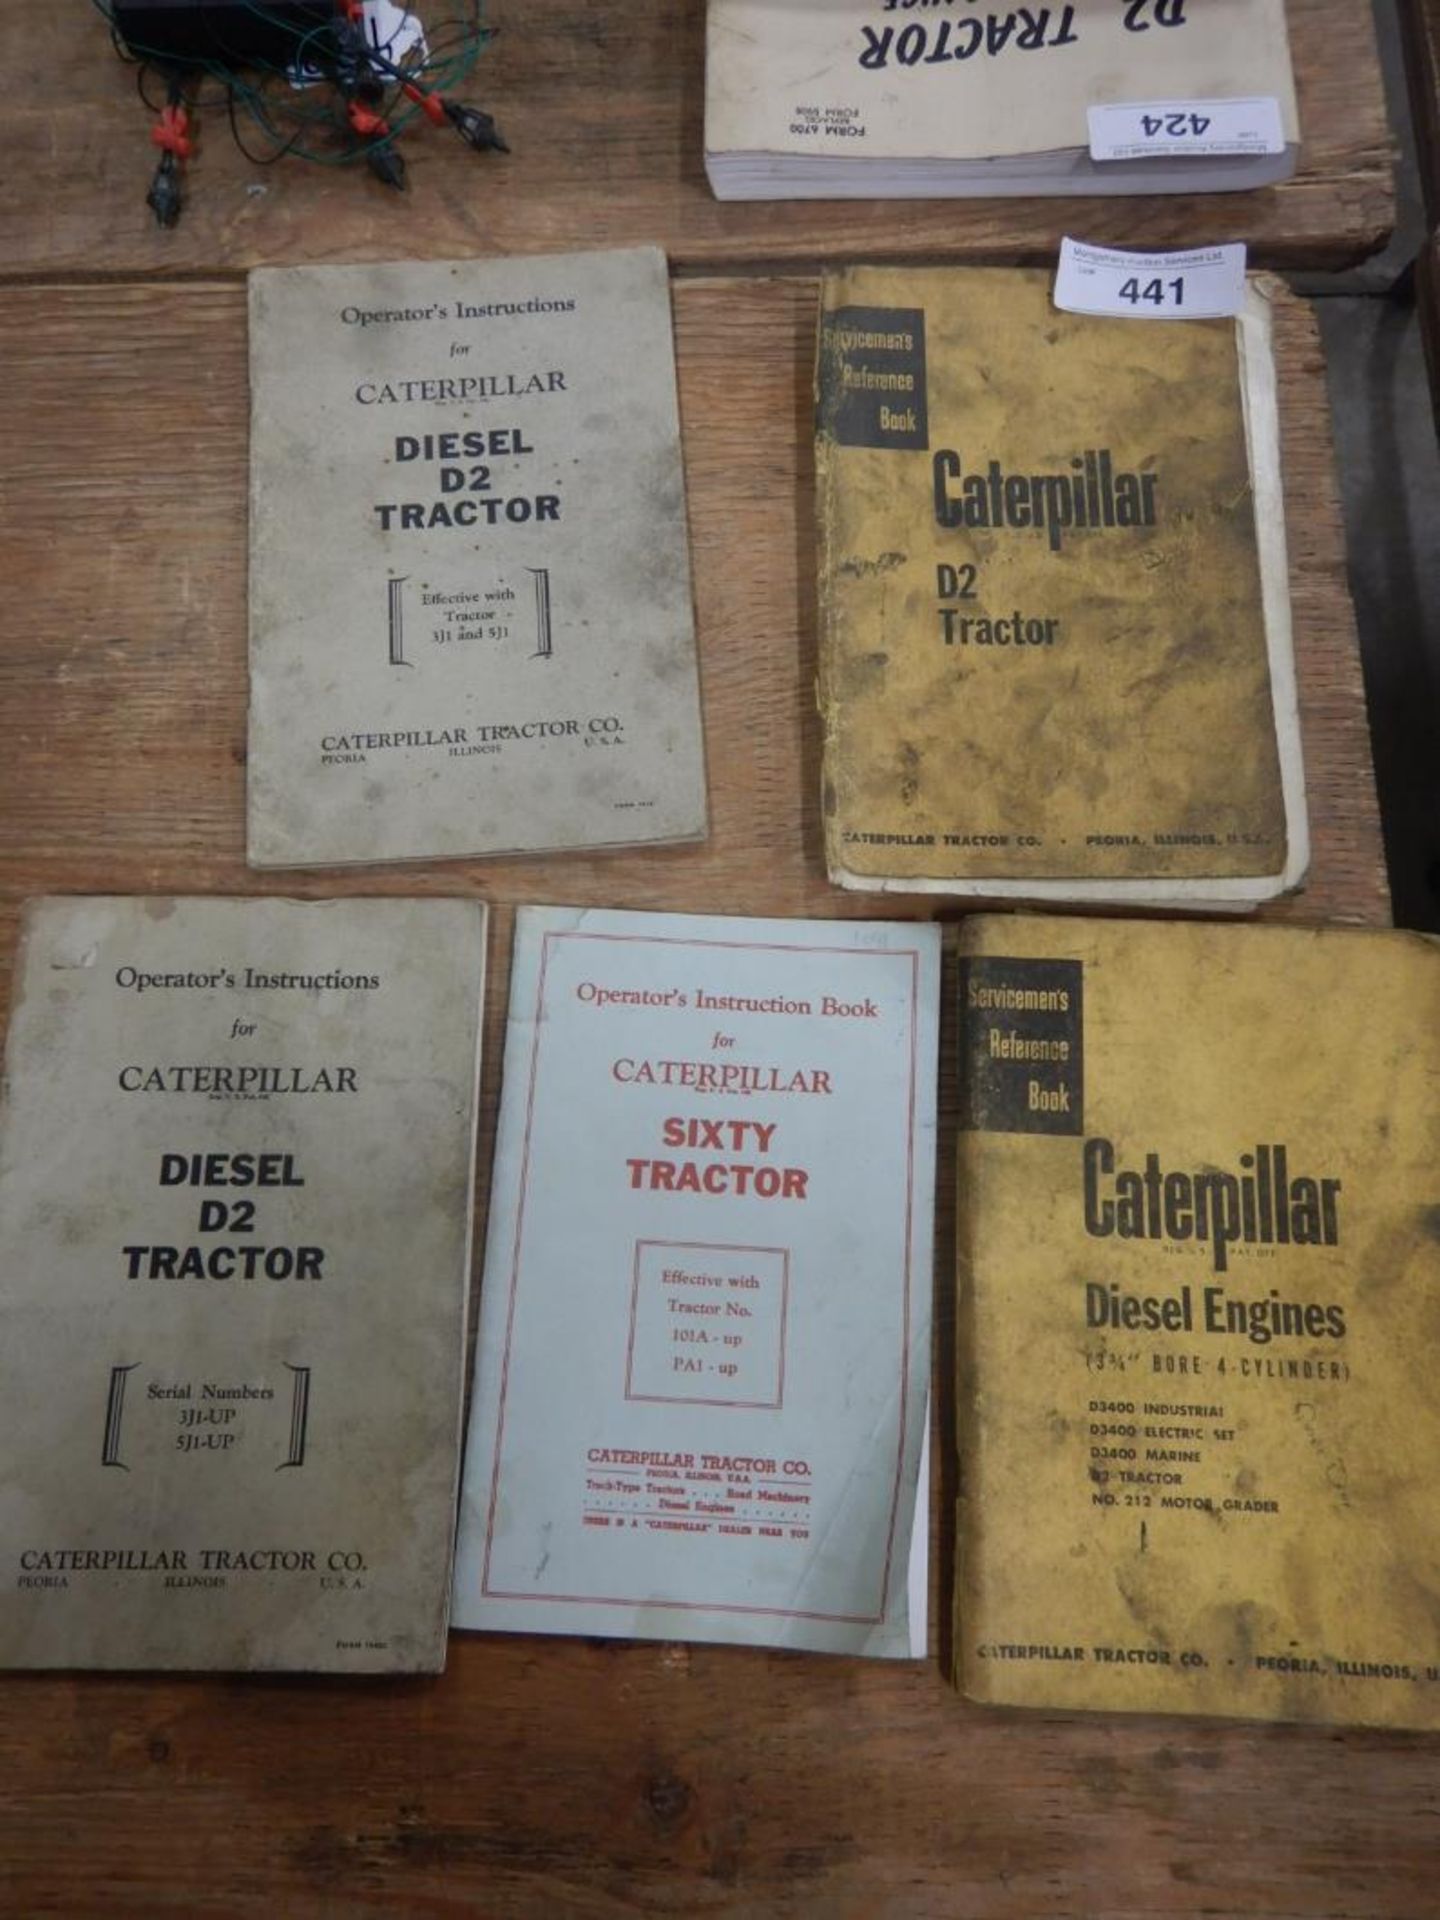 CATERPILLAR D2 TRACTOR SERVICE MAN REFERENCE BOOK, OPERATORS INSTRUCTION D2 (2), DIESEL ENGINES